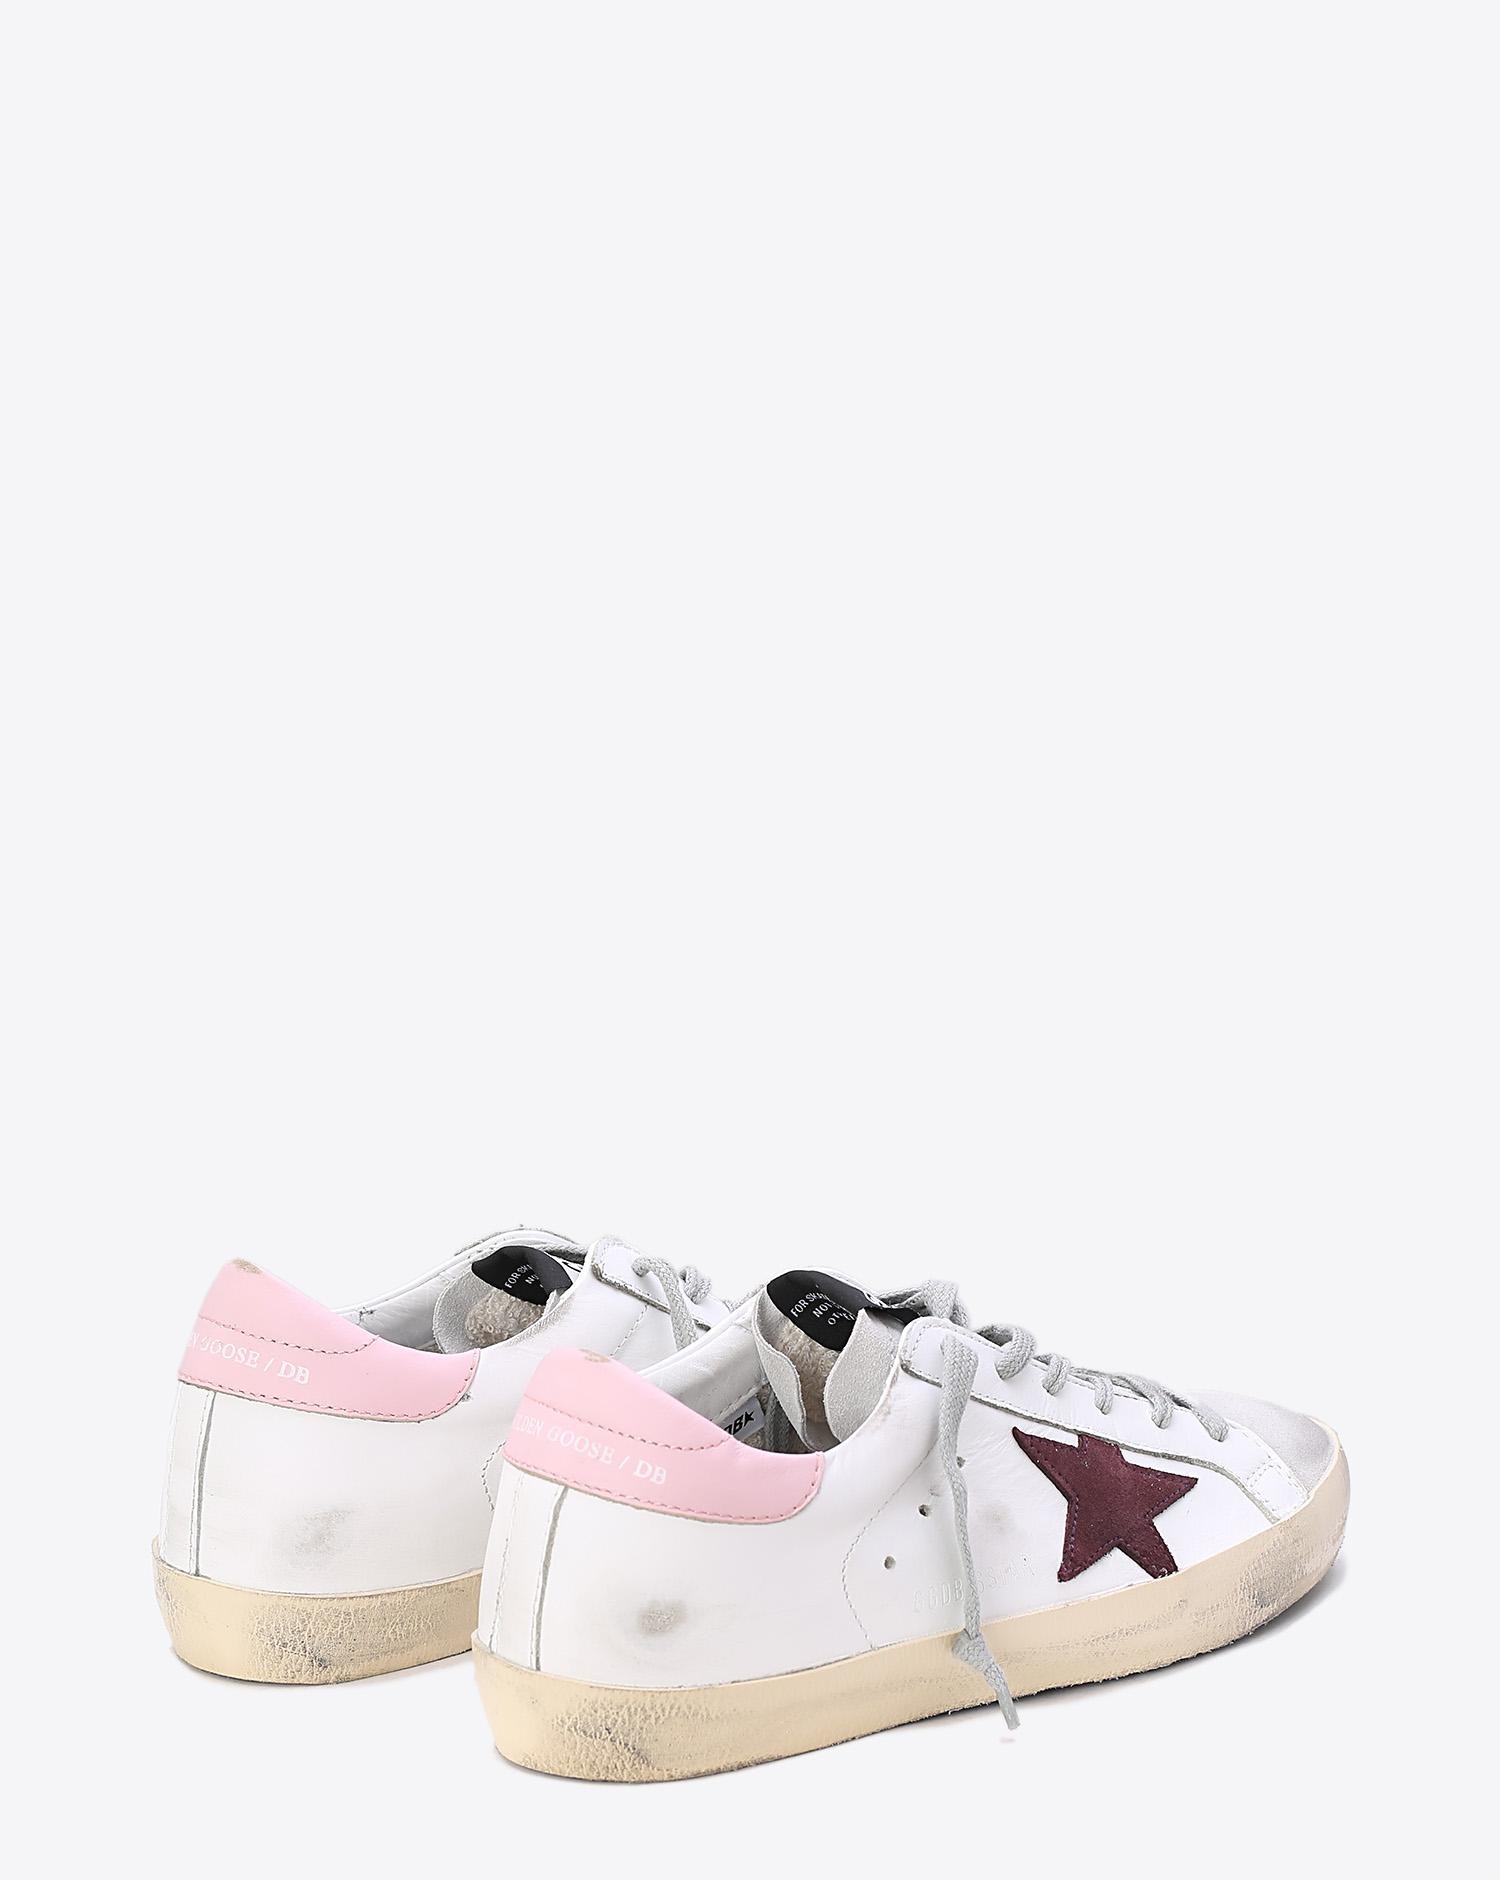 Golden Goose Woman Collection Sneakers Superstar White Pink Bordeaux Star   